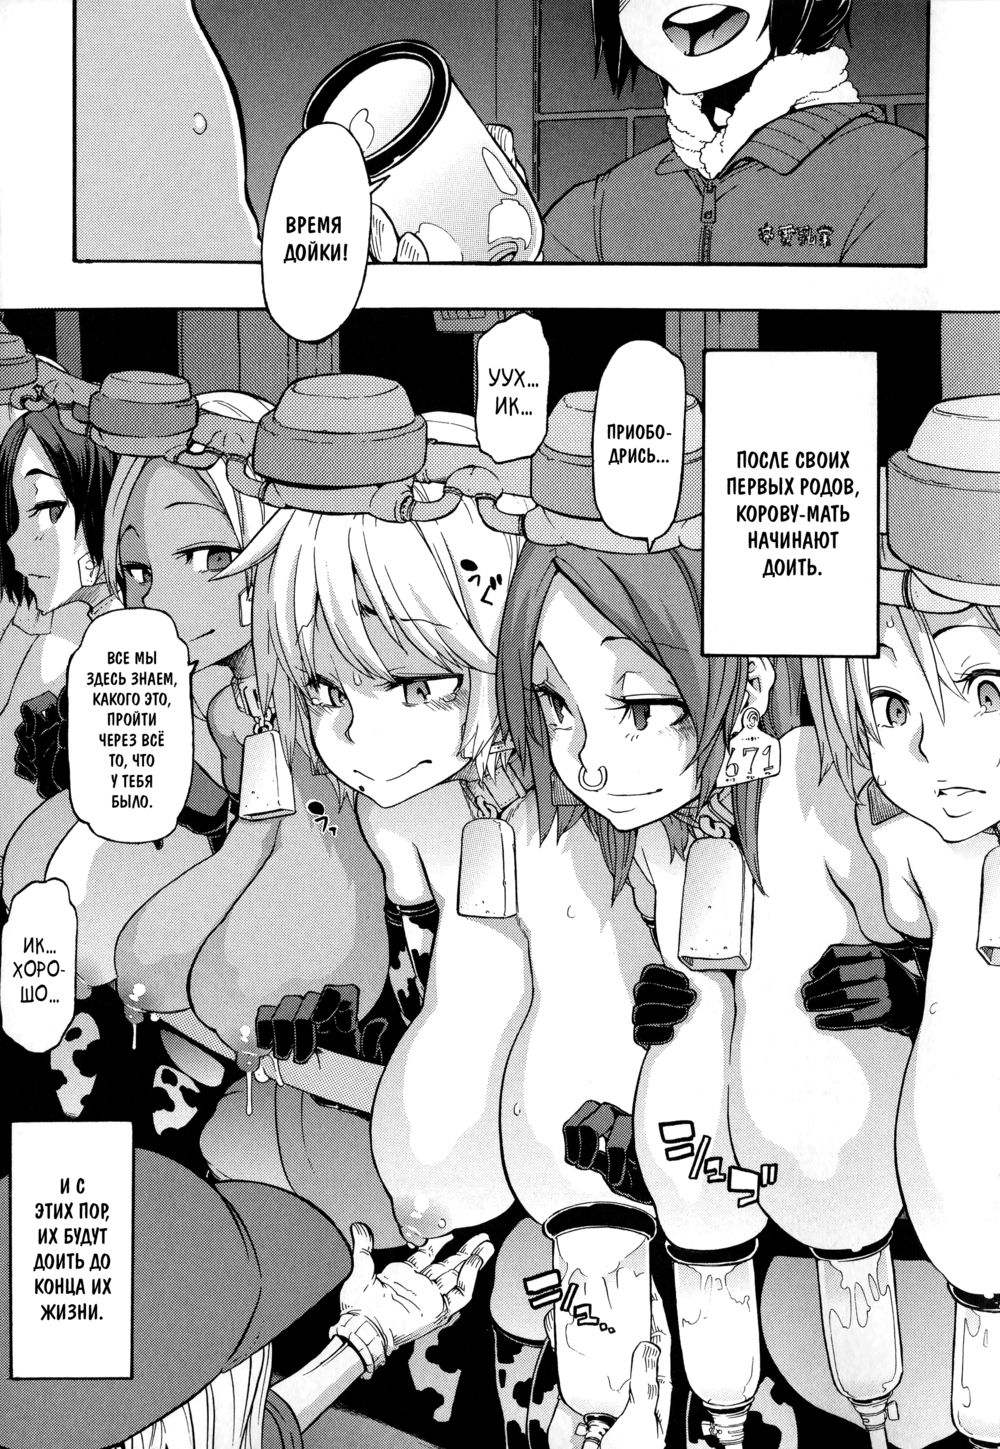 A Dairy Cow's Life Hentai